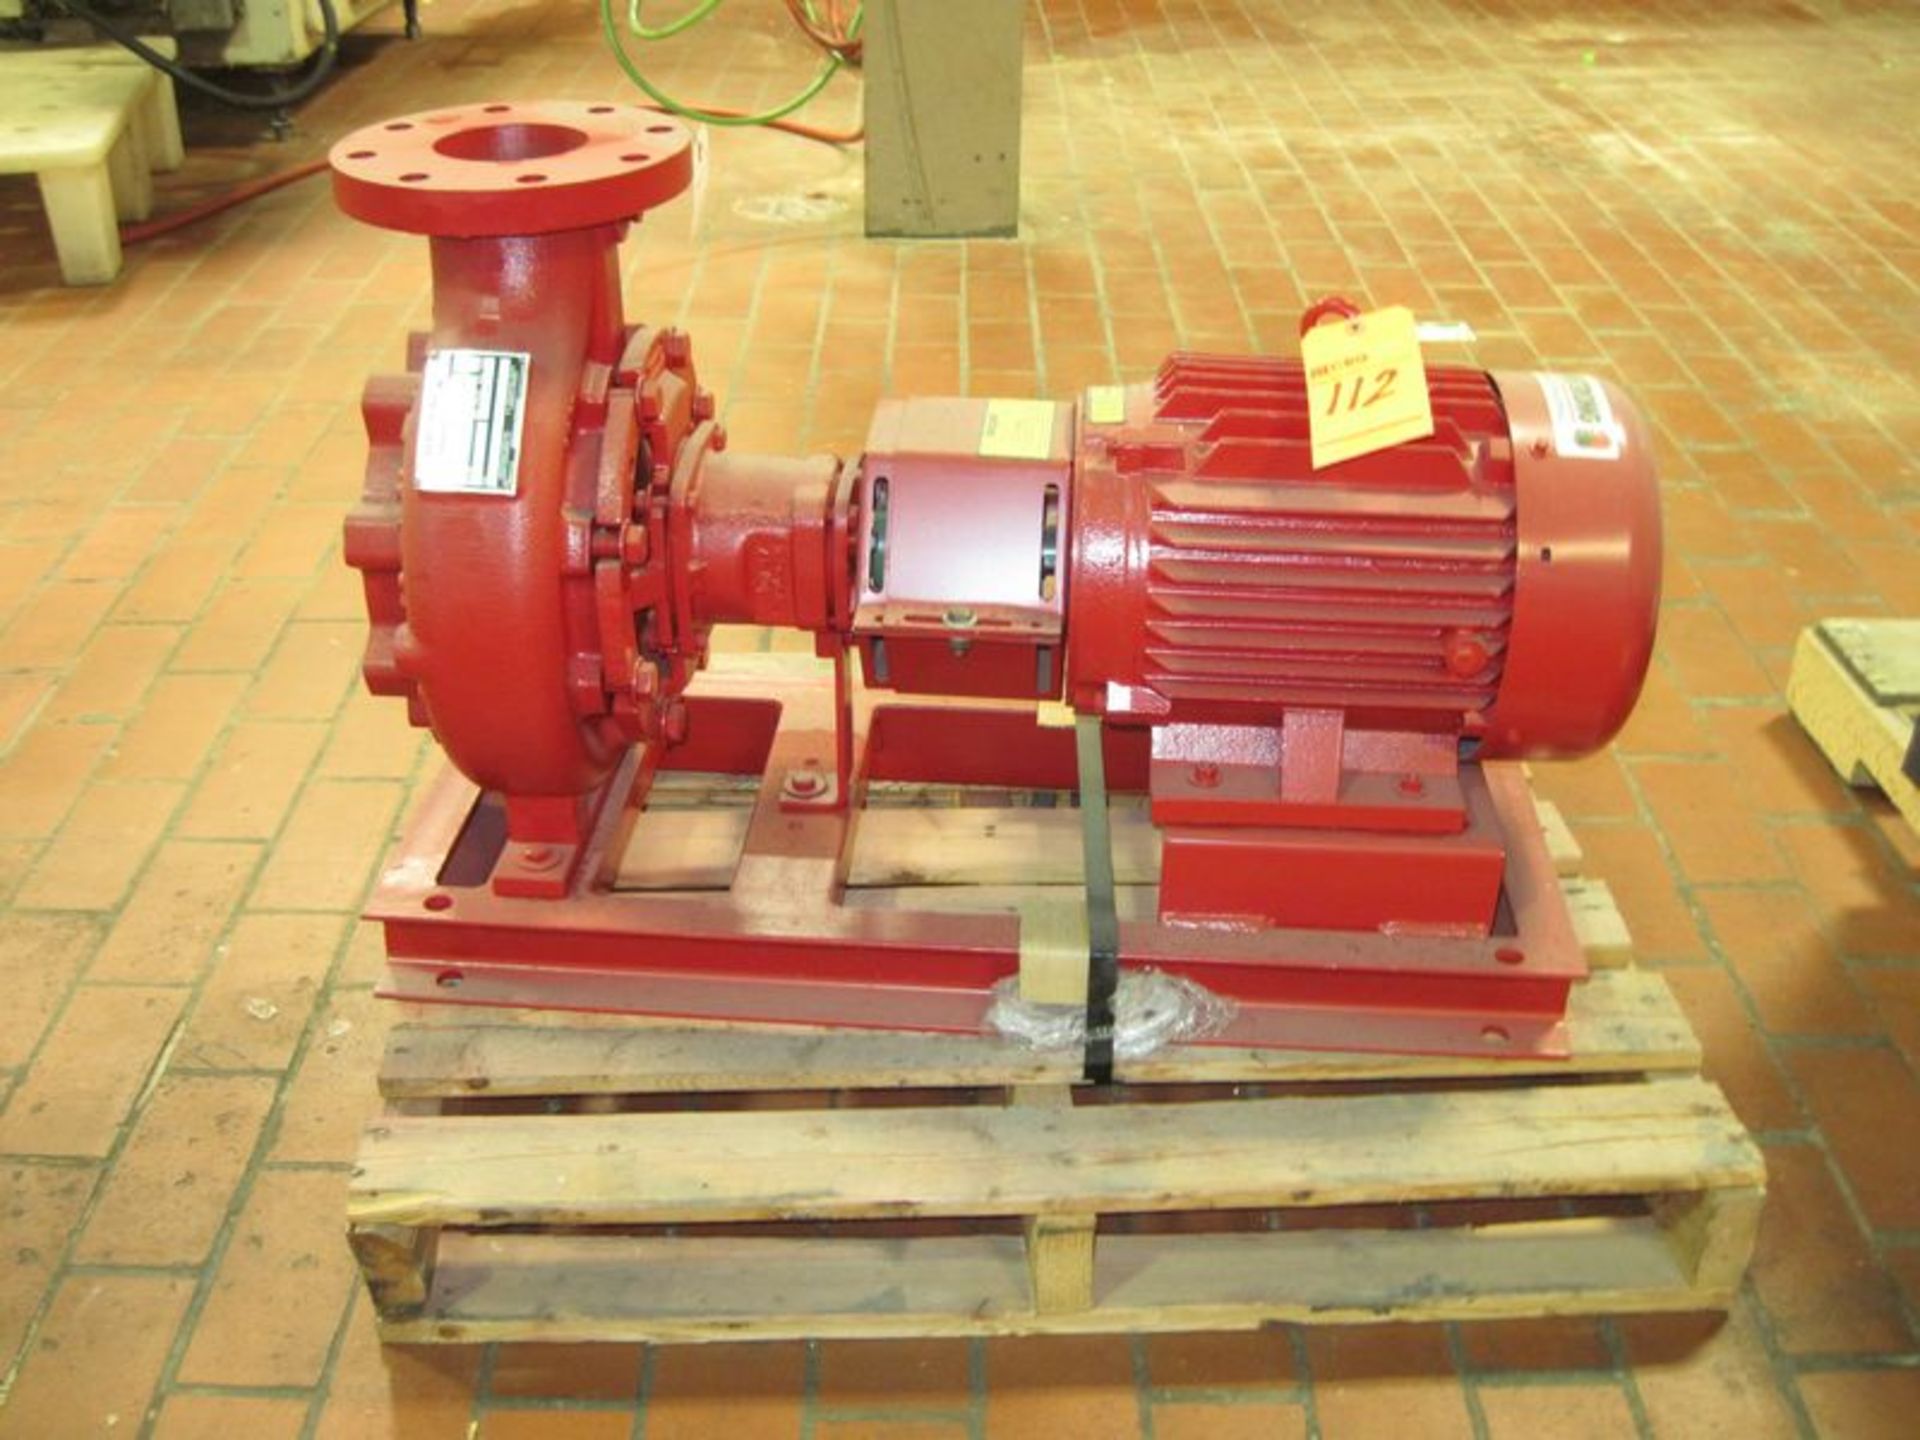 Unused Armstrong steel centrifugal pump. Model 4030, size 6x4x8, serial# 598622. With 7.5hp motor.